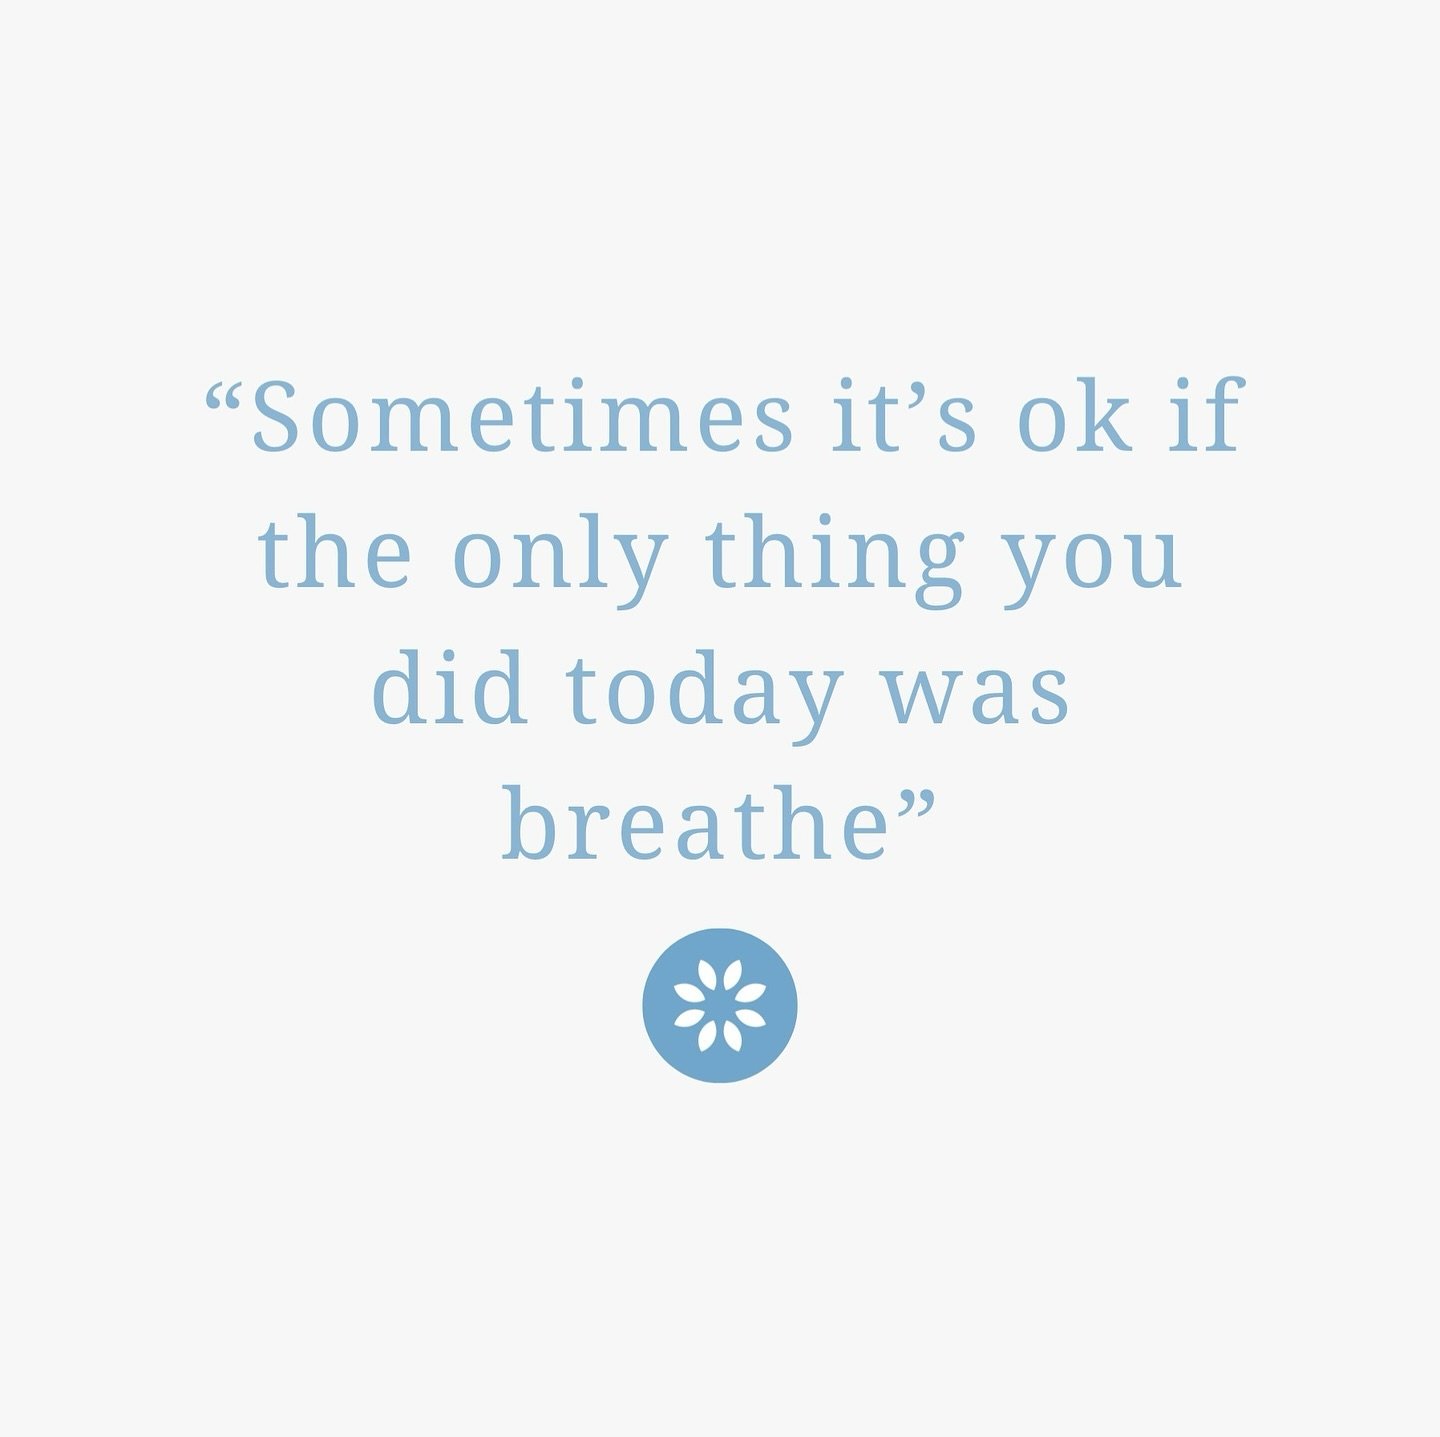 A gentle reminder that we are all trying our best and that sometimes breathing is all we can achieve, which is totally ok and healthy in our busy lives! Life moves so fast that it is so important to stop and breathe (functionally that is!). 
. 
Looki